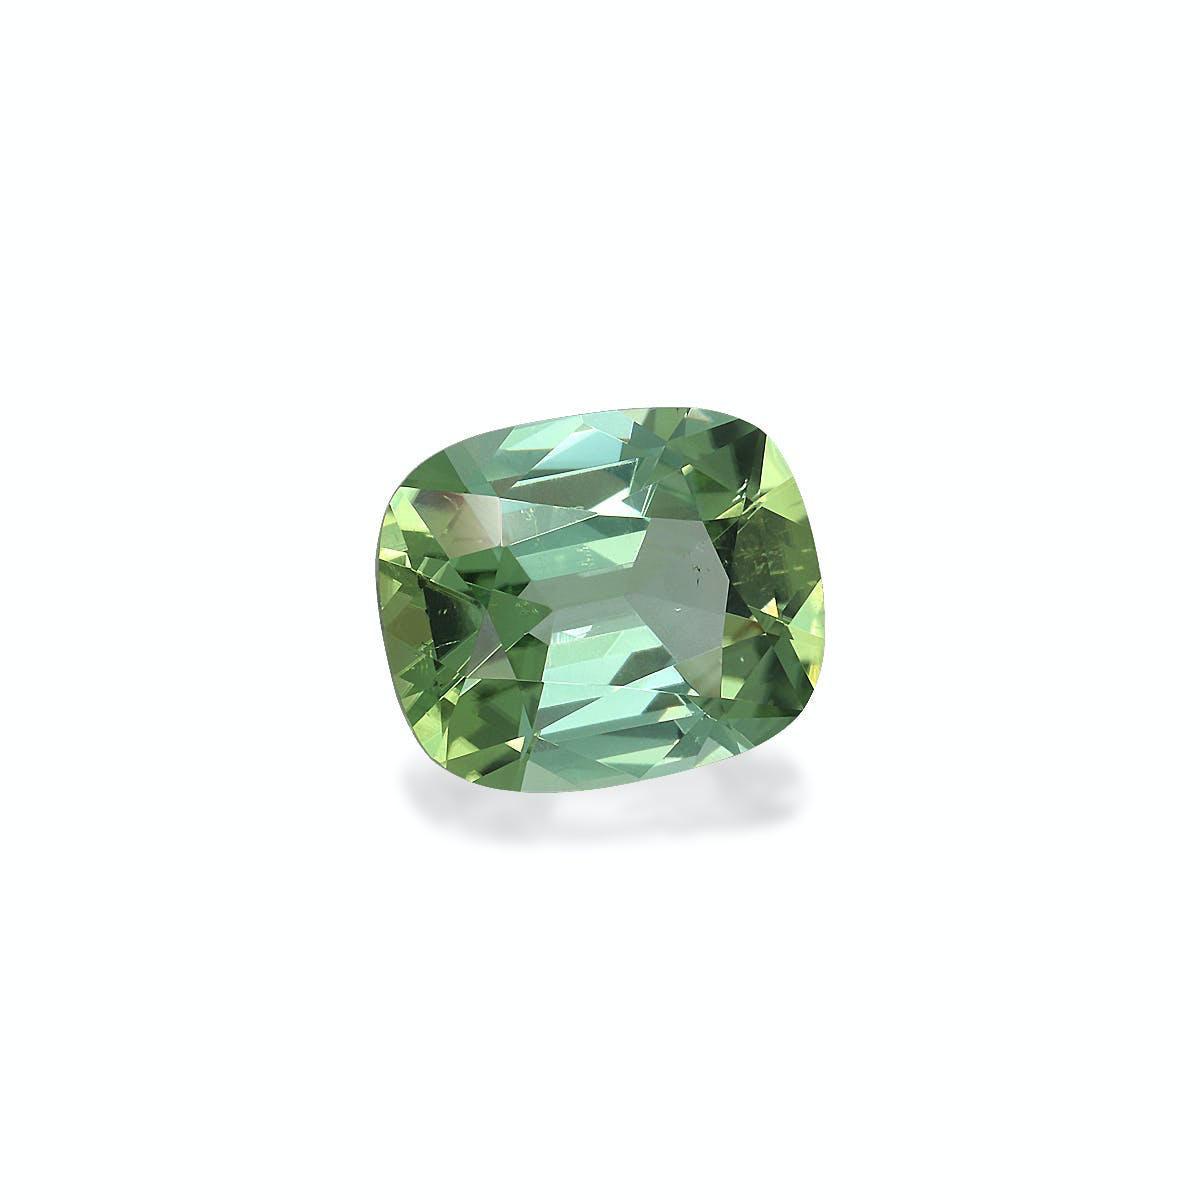 Picture of Cotton Green Tourmaline 4.02ct - 11x9mm (TG1412)